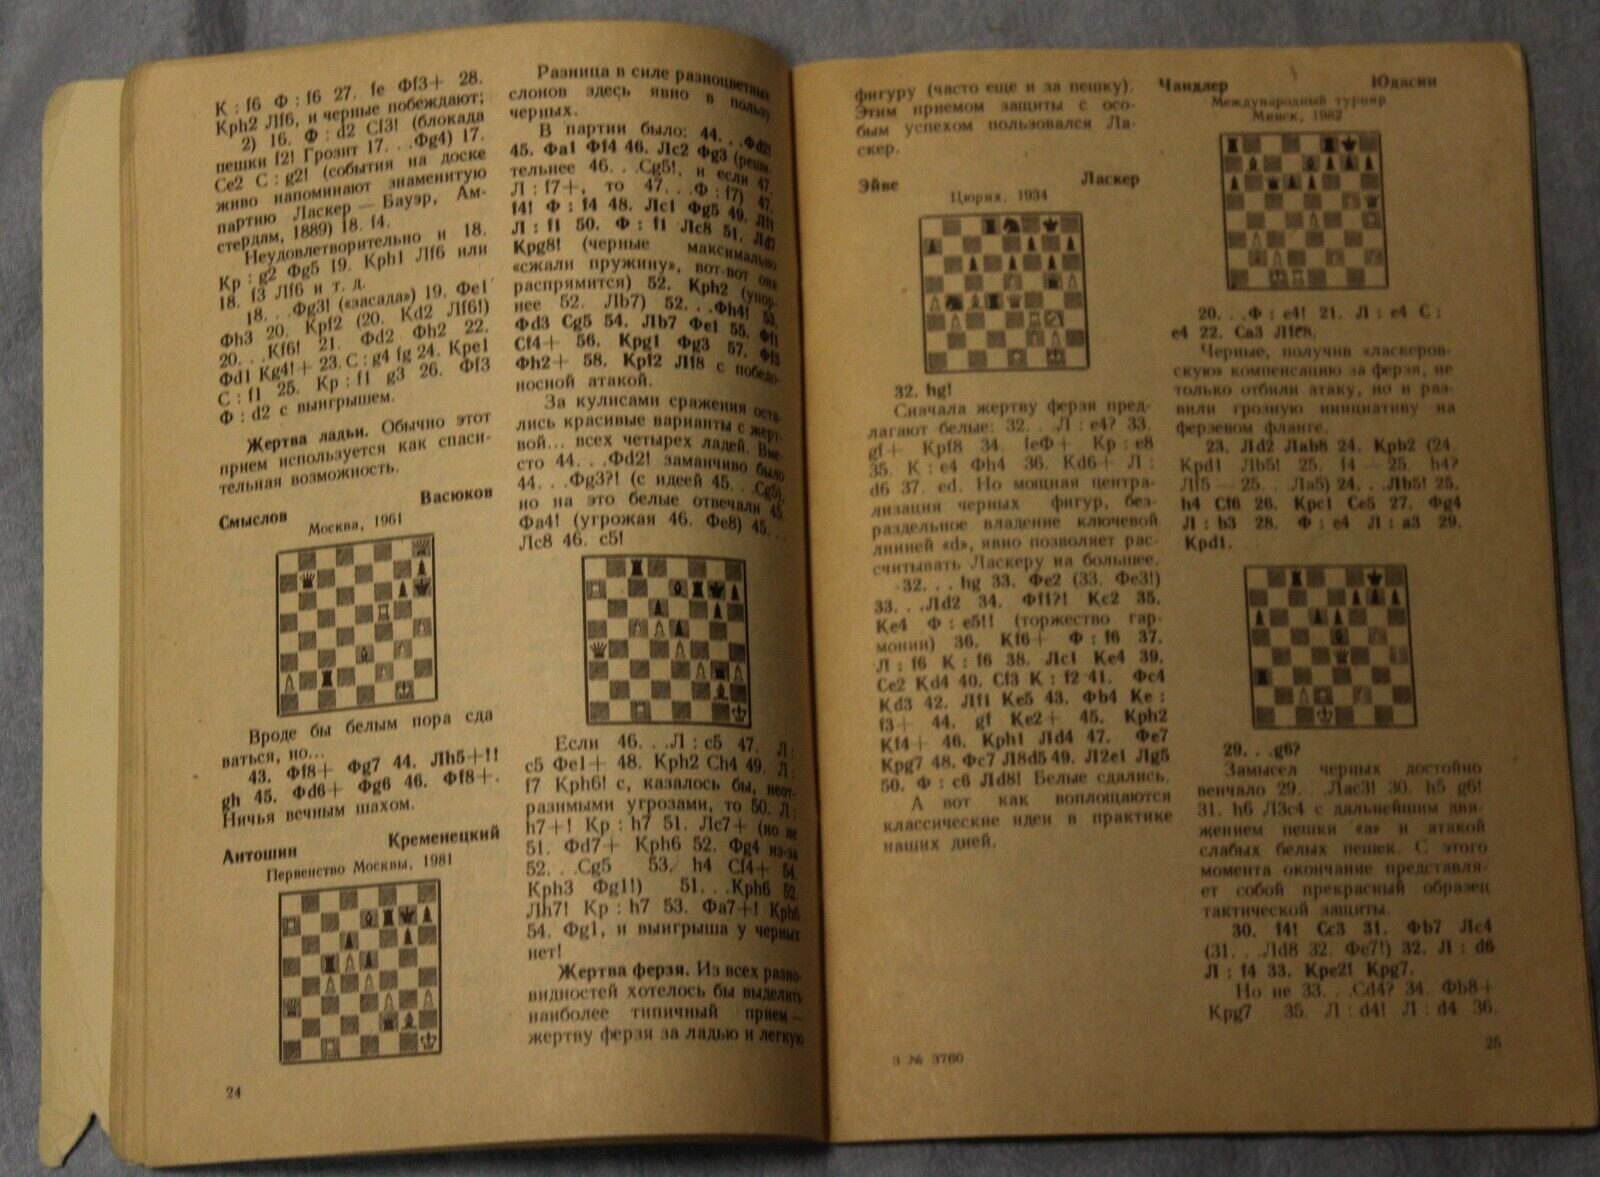 11601.Russian Soviet Chess Book signed by  D. G. Plisetsky. Protection Technique. 1985